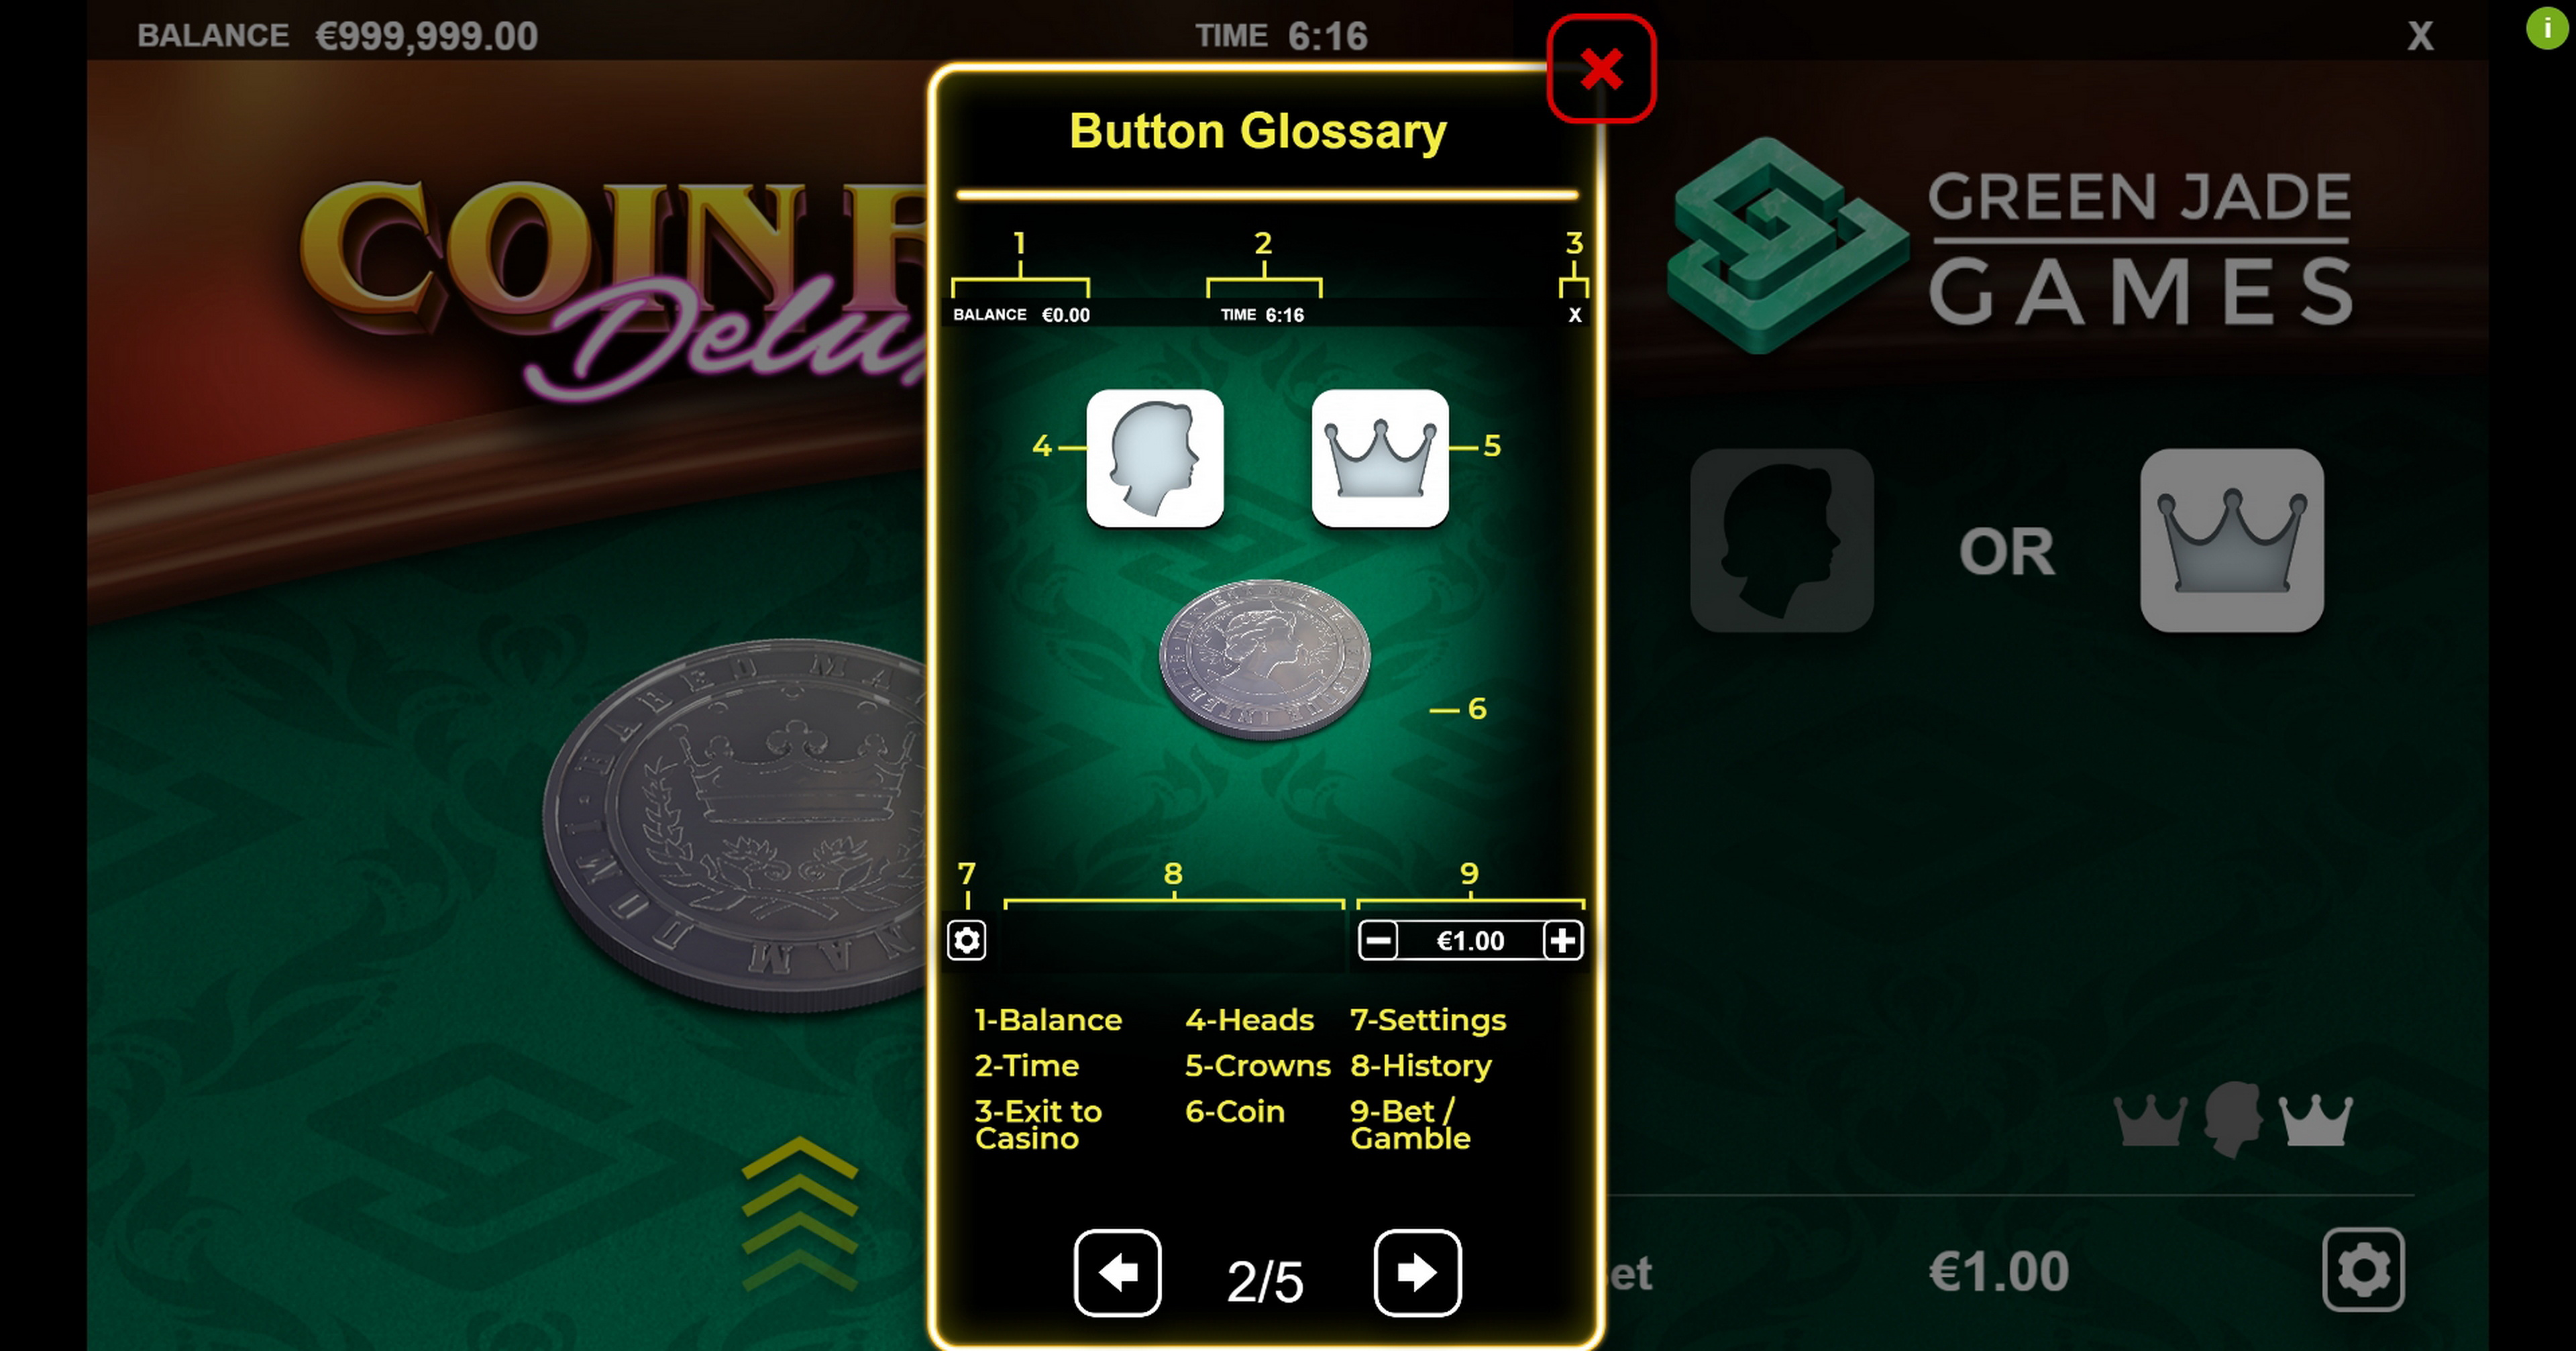 Info of Coin Flip Deluxe Slot Game by Green Jade Games